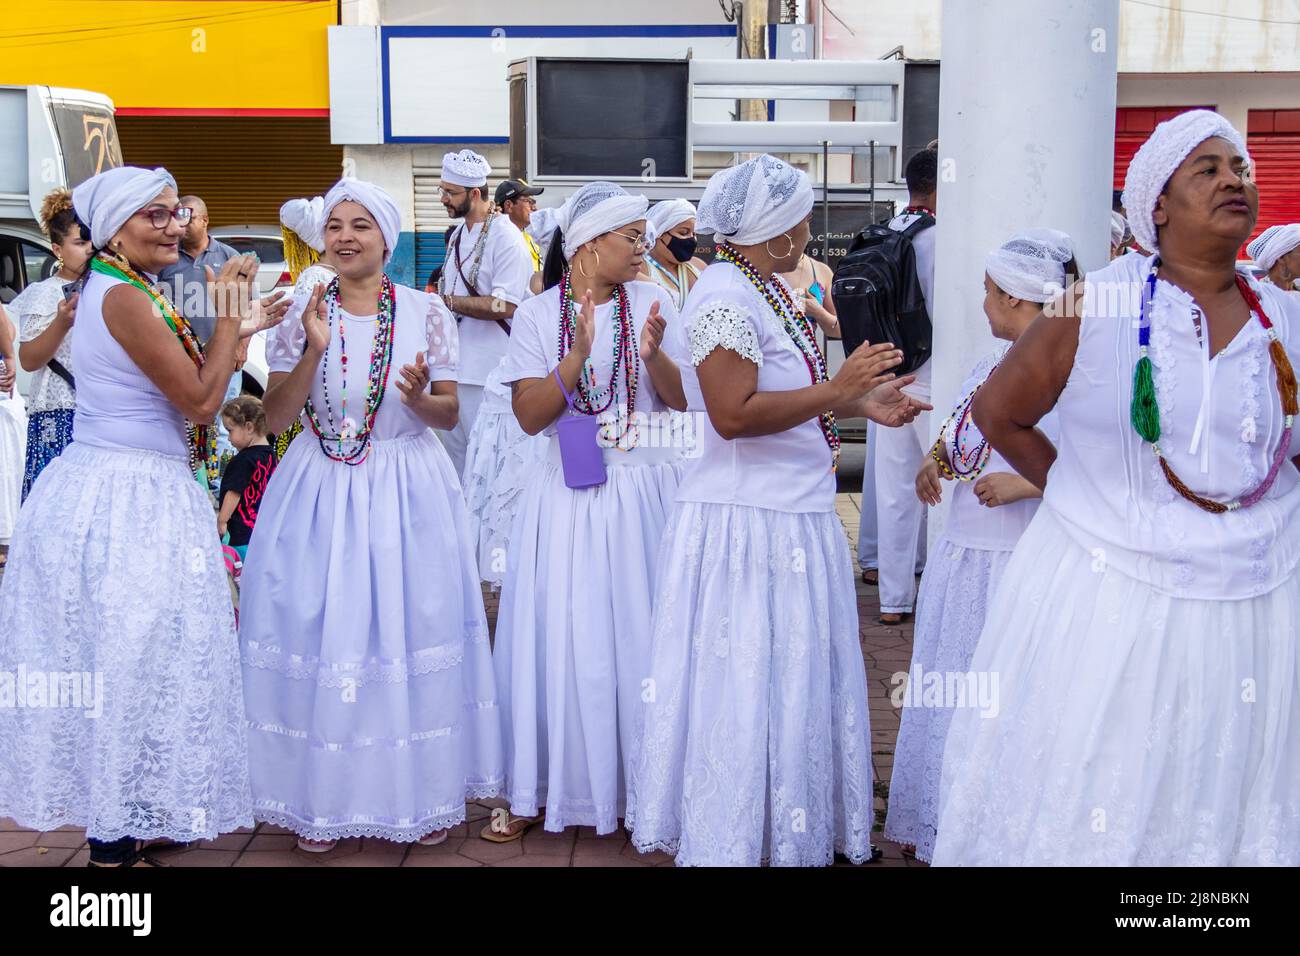 Aparecida de Goiania, Goiás, Brazil – May 15, 2022: The baianas in traditional white clothes. Some people gathered for the Procession of Old Blacks. Stock Photo